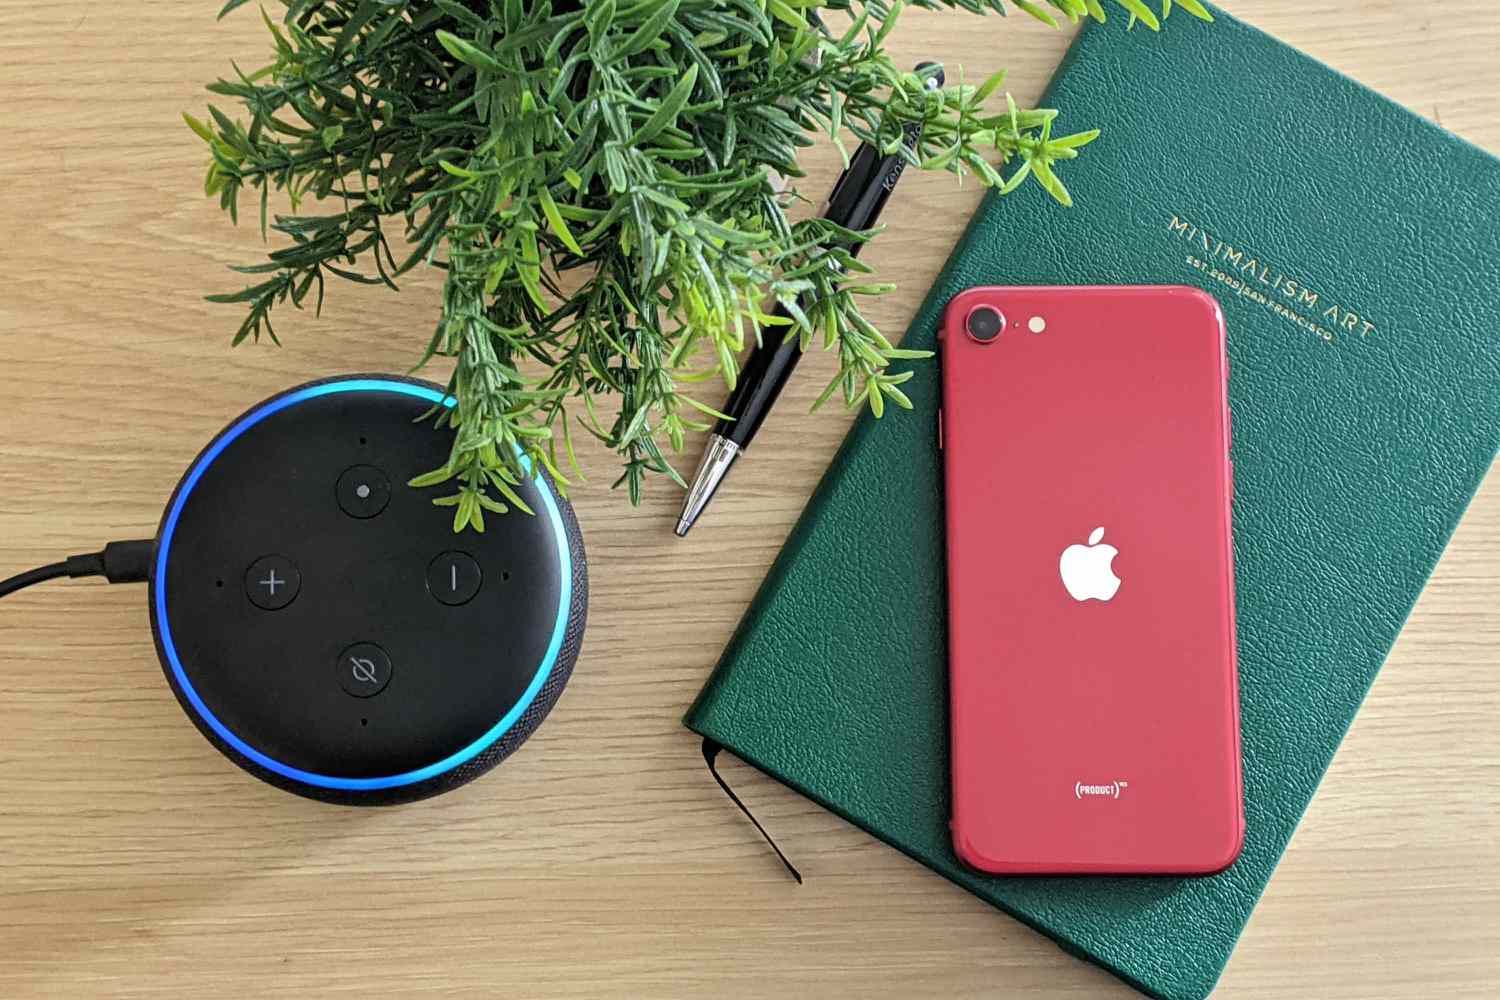 Connecting IPhone To Alexa Speaker: Step-by-Step Guide